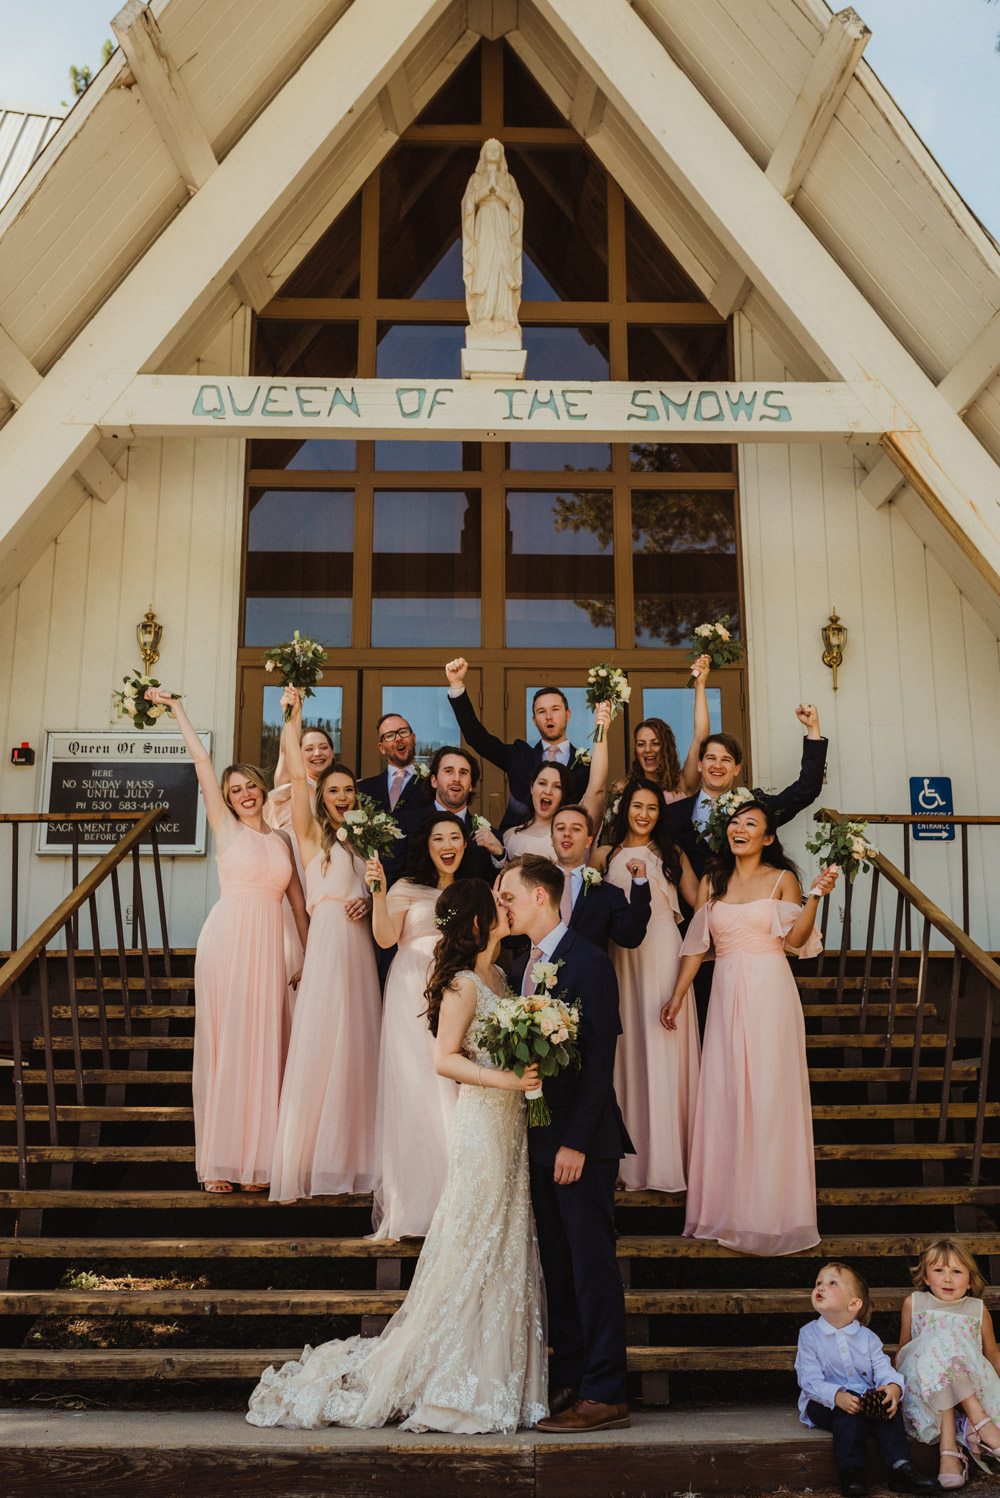 Hellman-Erman Mansion Wedding, photo of bridal party in front of the church (Quen of the Snows)